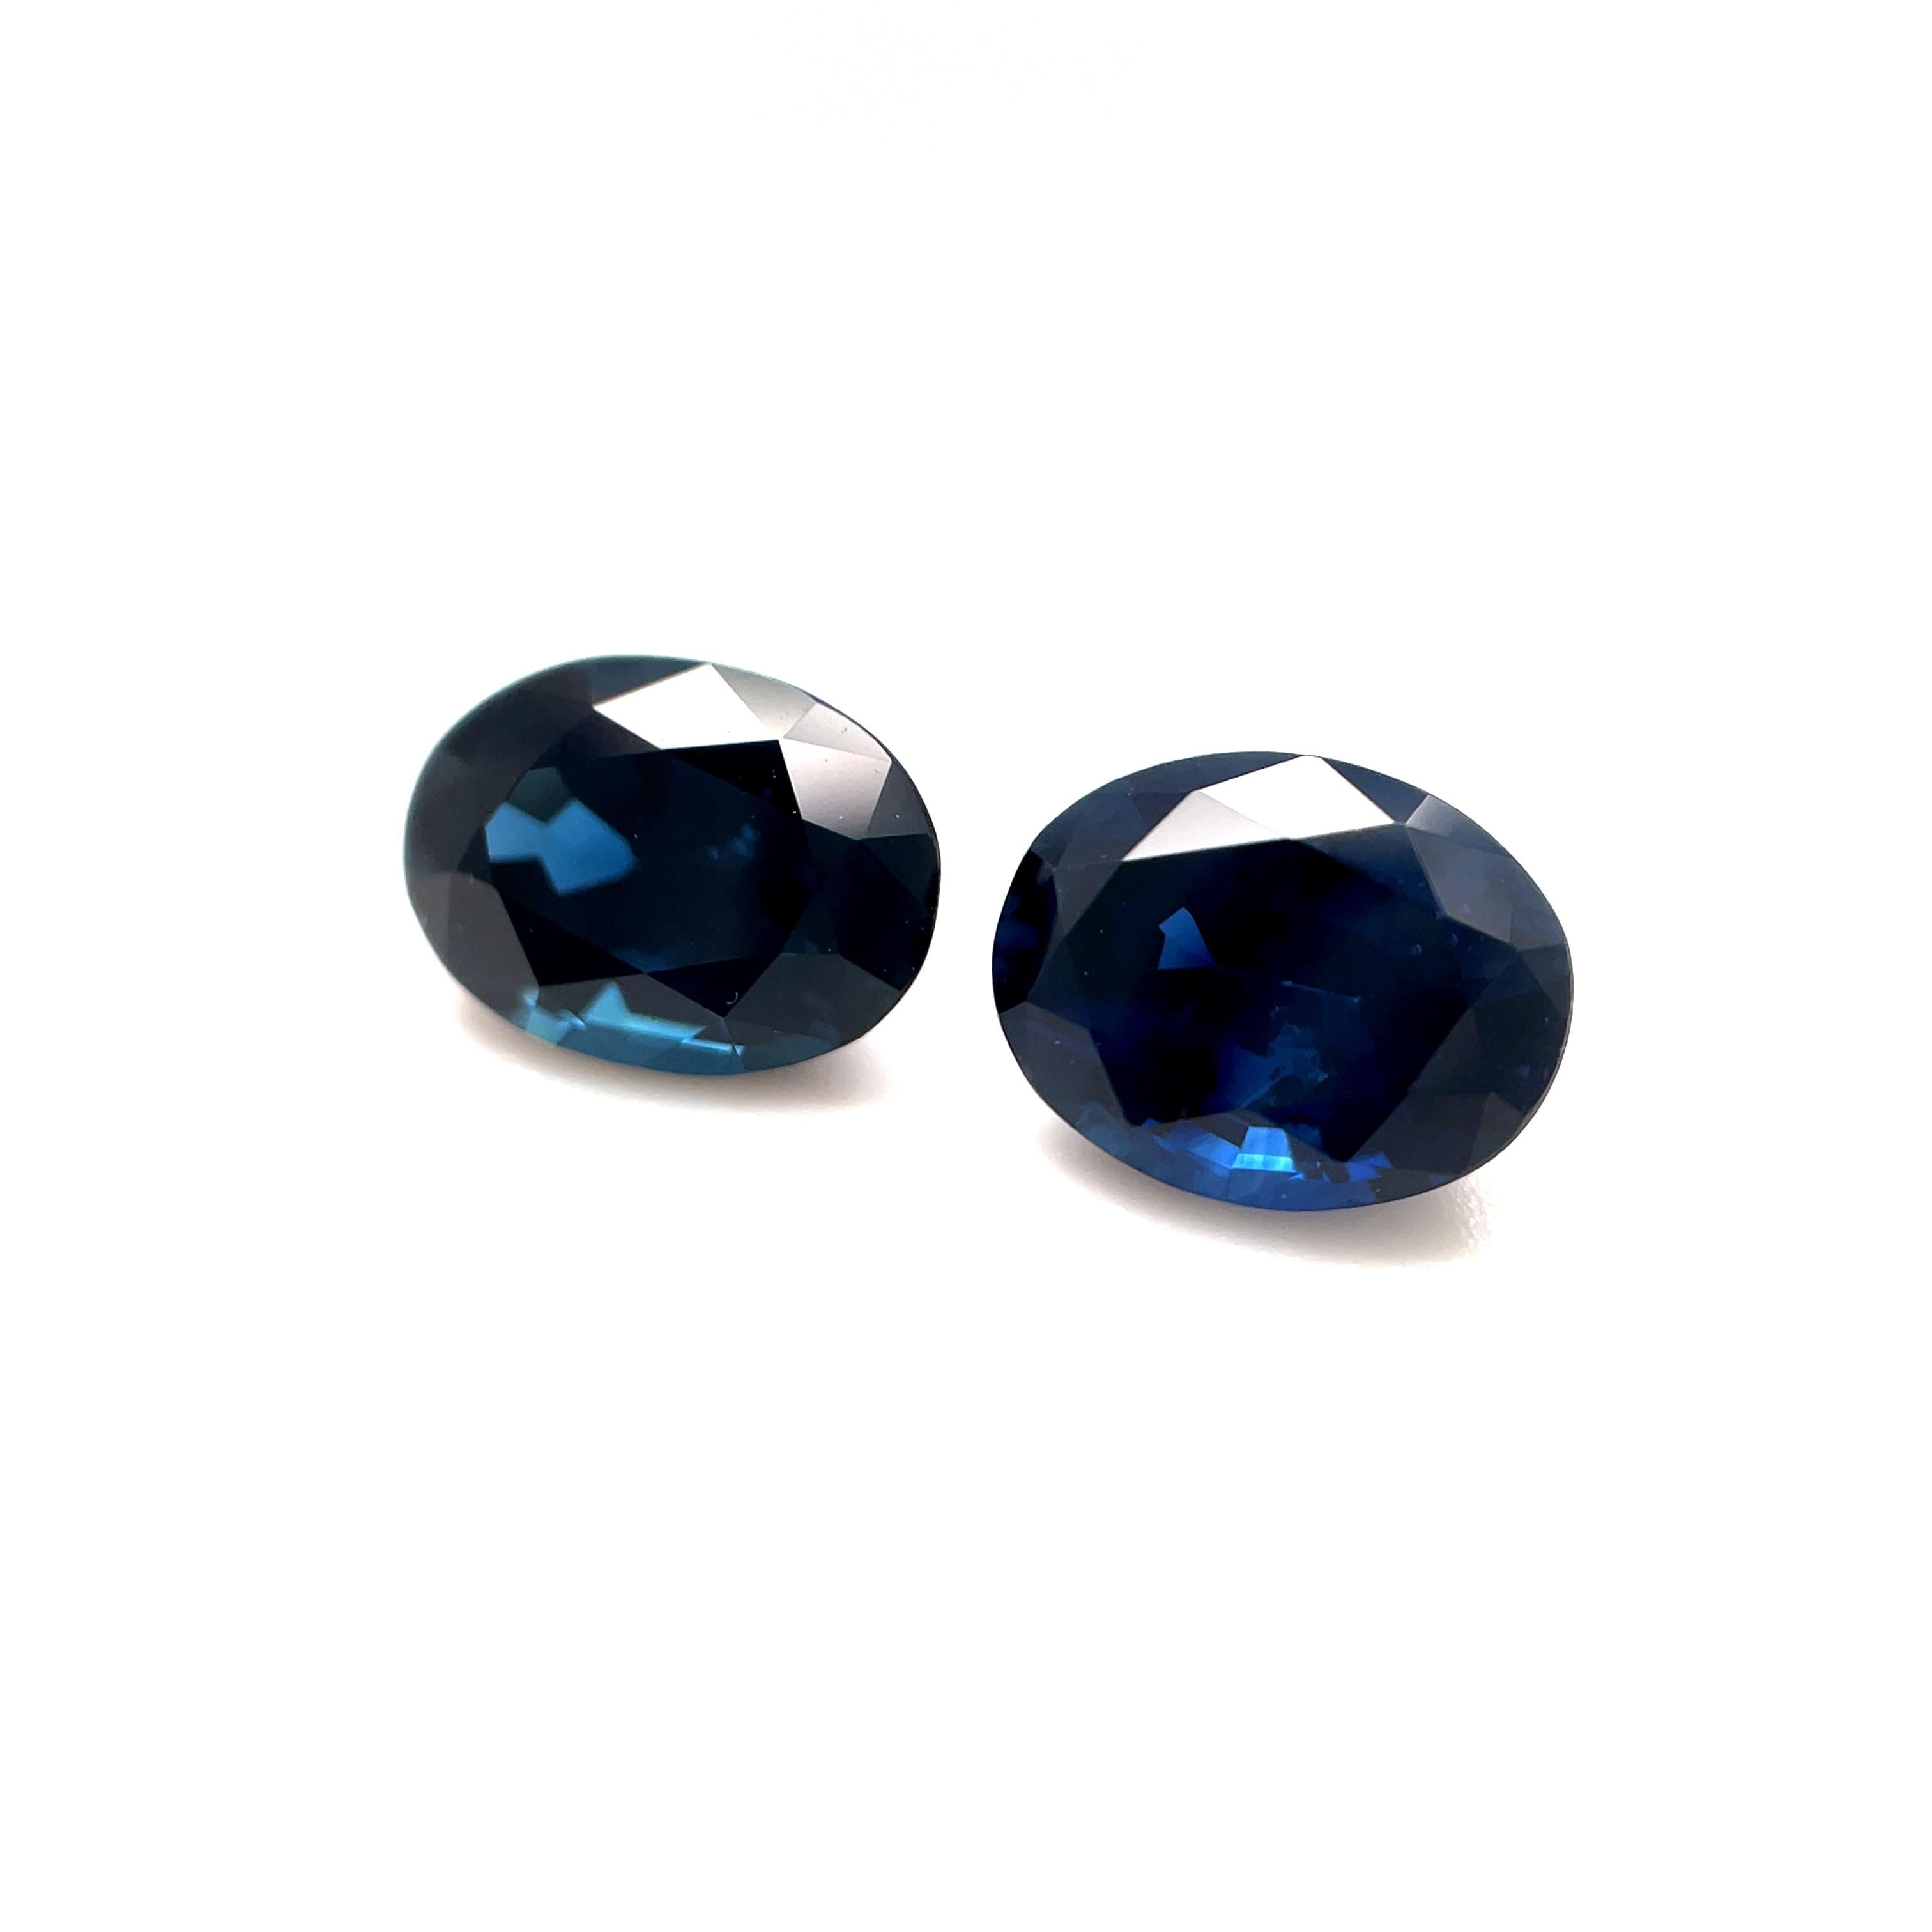  Royal Blue Sapphire Pair, 3.82 Carats Total, Loose Gemstones for Earrings For Sale 1